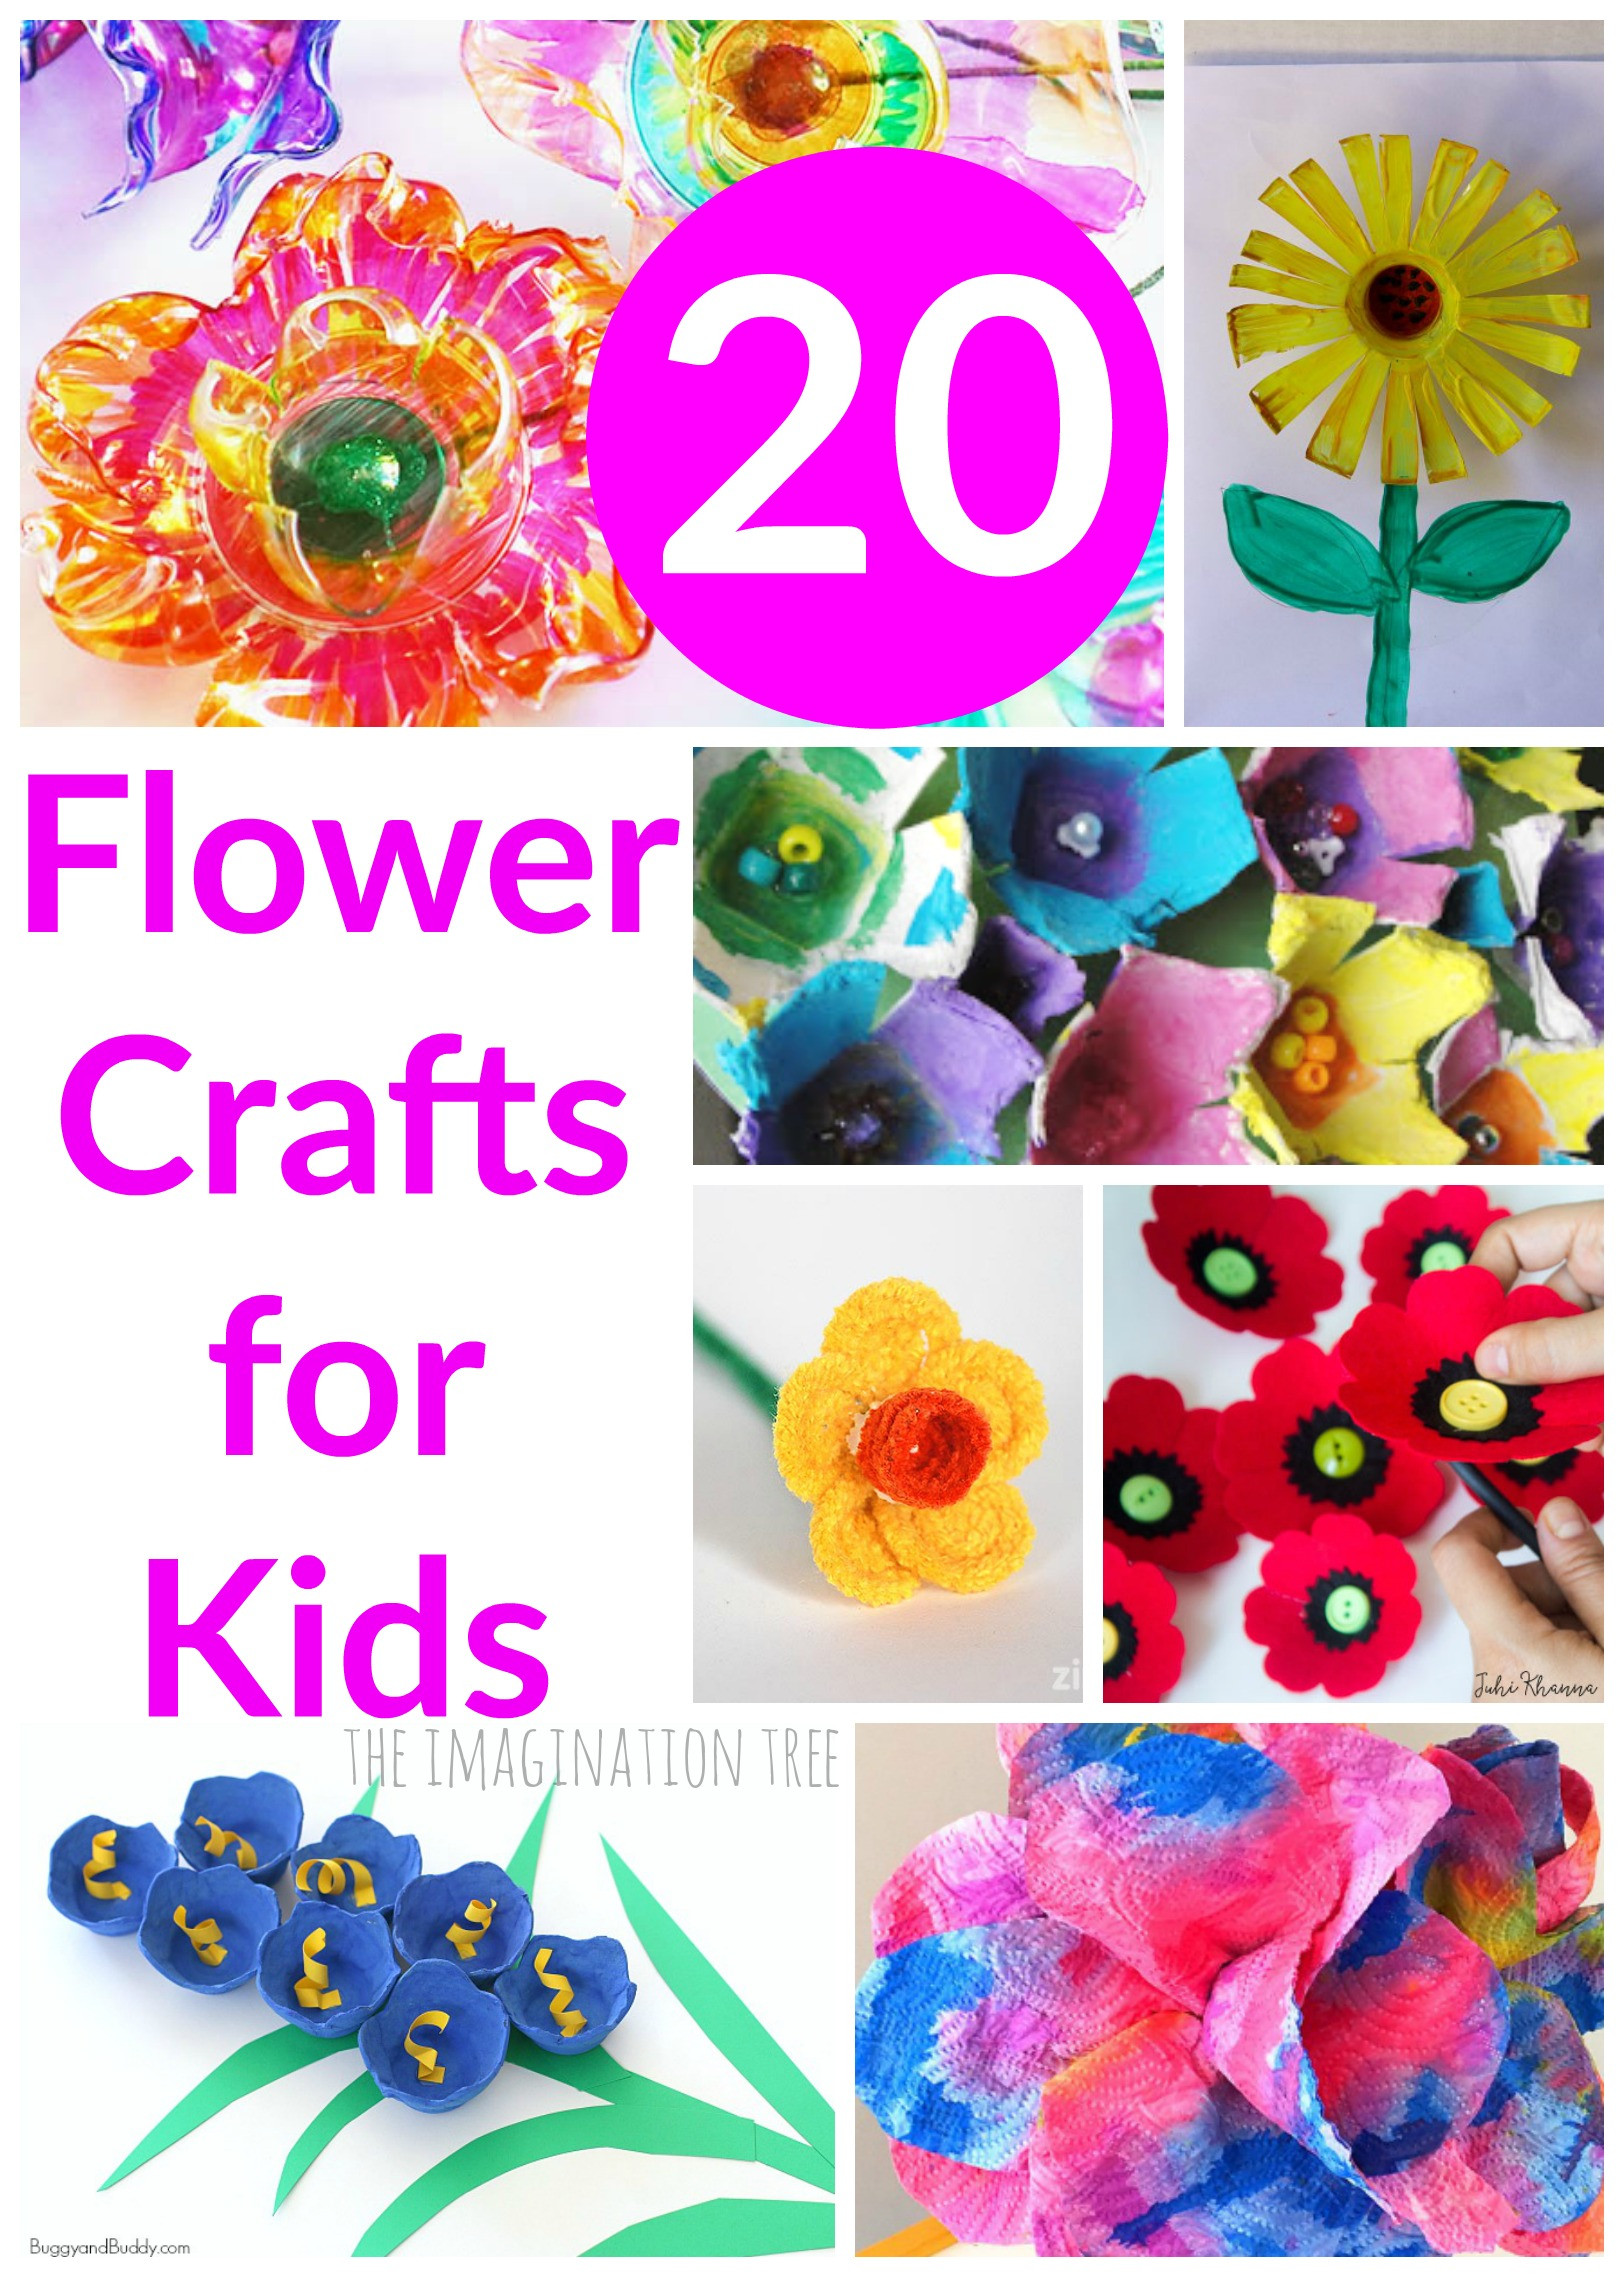 Kids Crafts For Mother's Day
 20 Flower Crafts for Kids The Imagination Tree